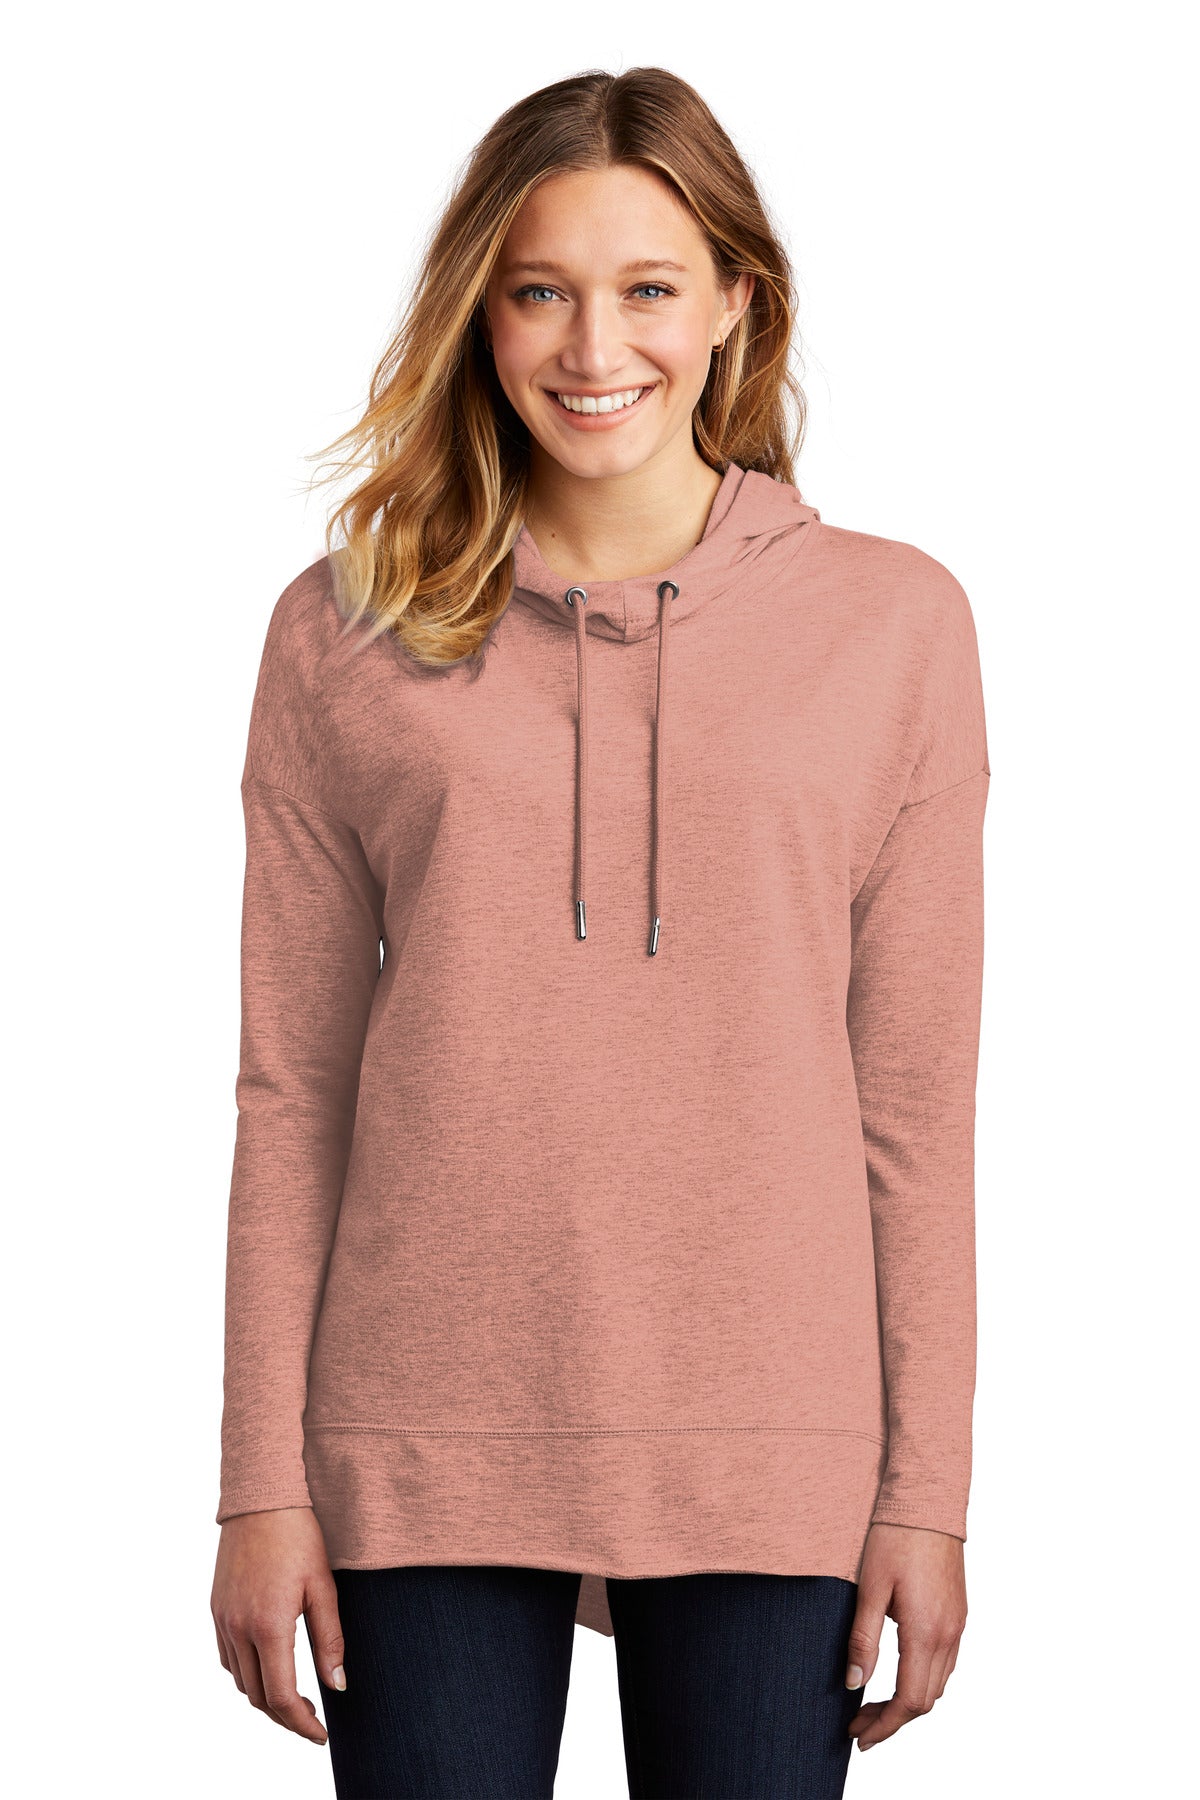 District Women's Featherweight French Terry ™ Hoodie DT671